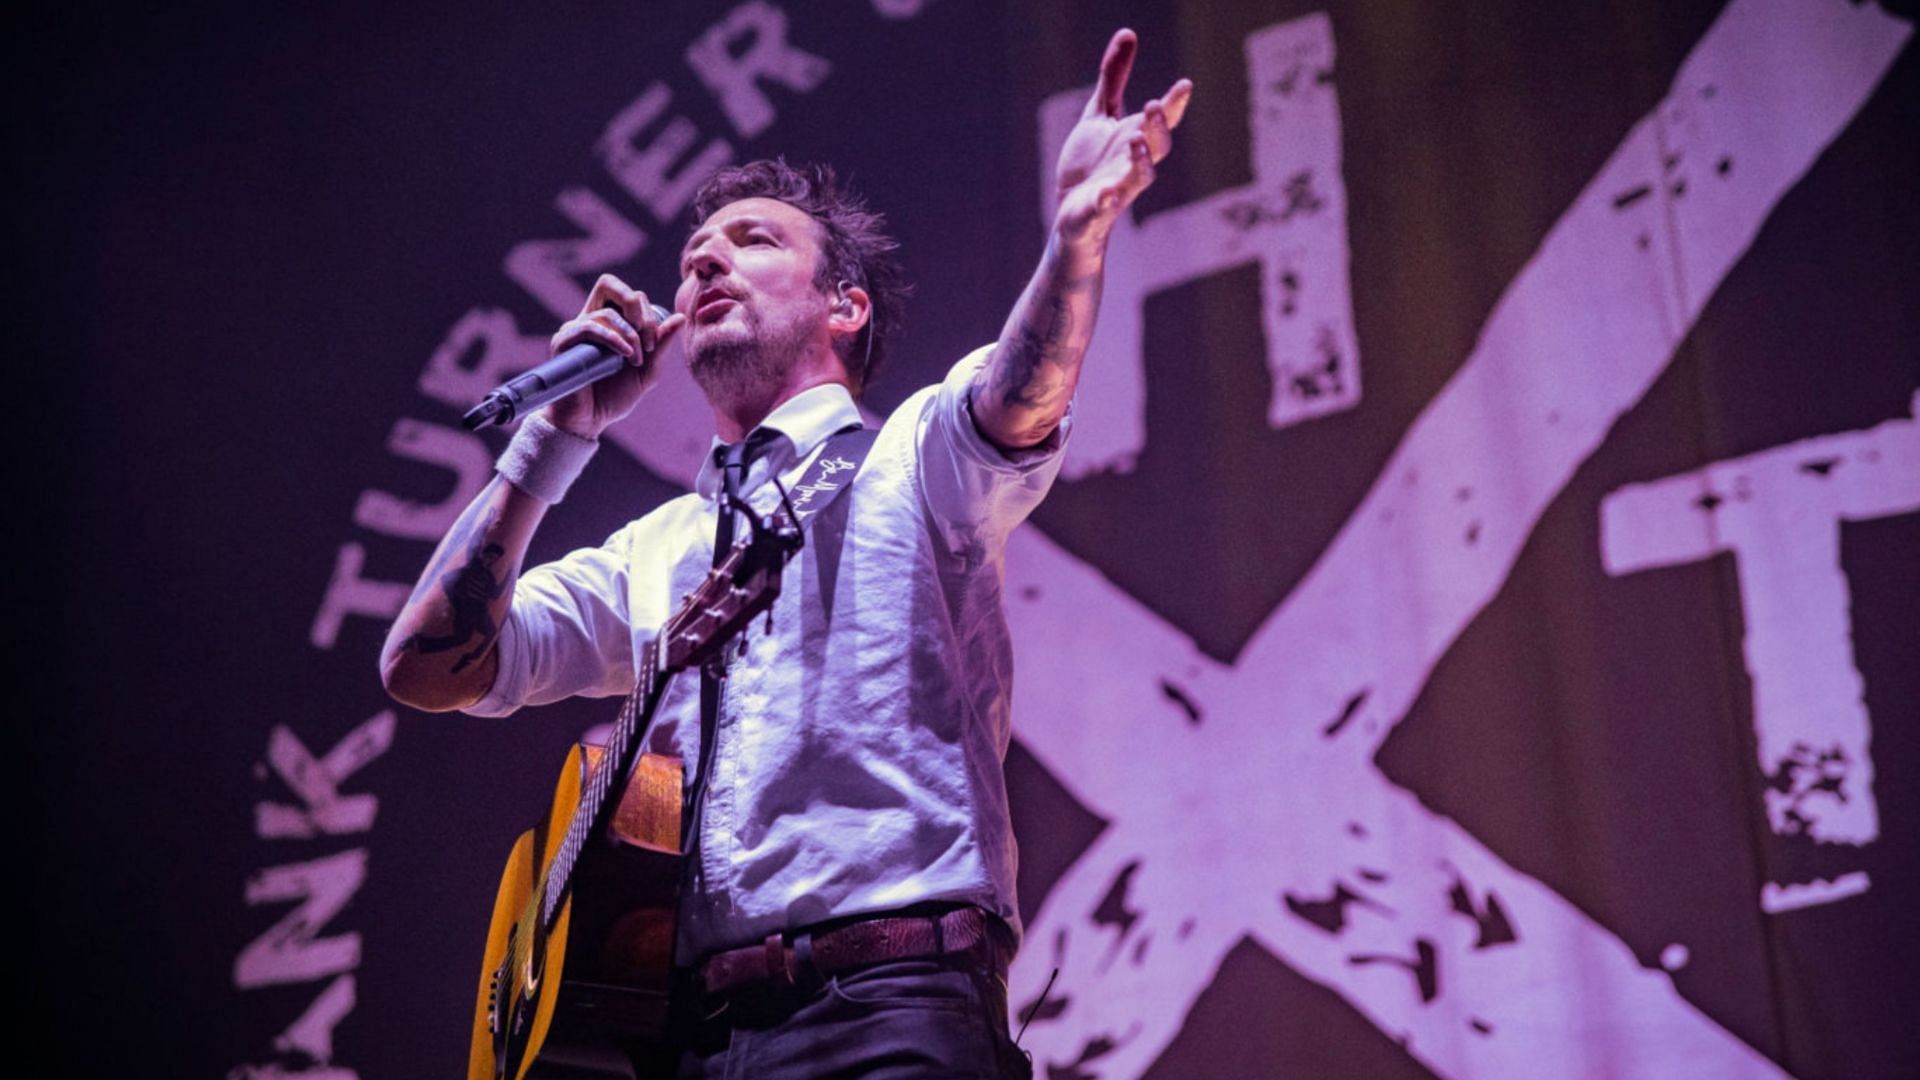 Frank Turner Tour 2023 Tickets, where to buy, dates, venues, and more